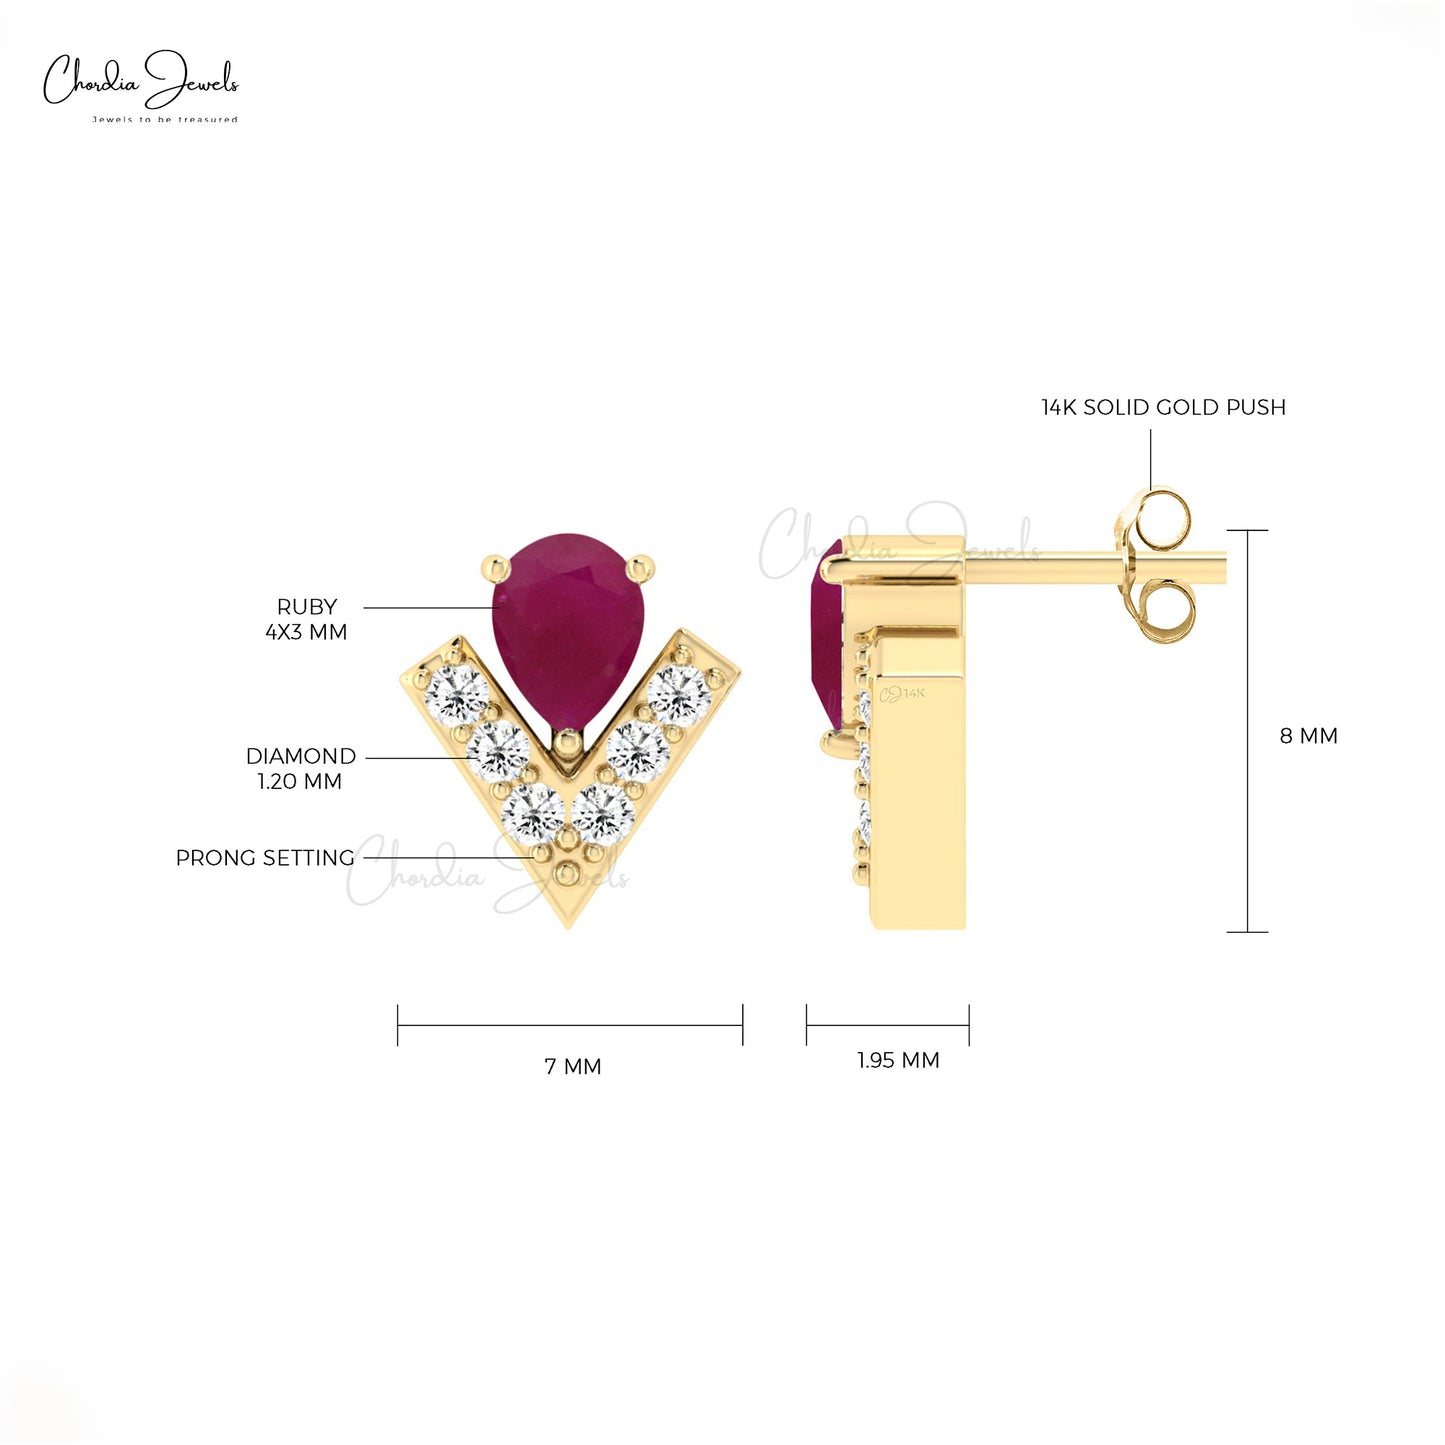 Dainty Pear Cut Ruby Studs Earring In 14k Gold With White Diamond